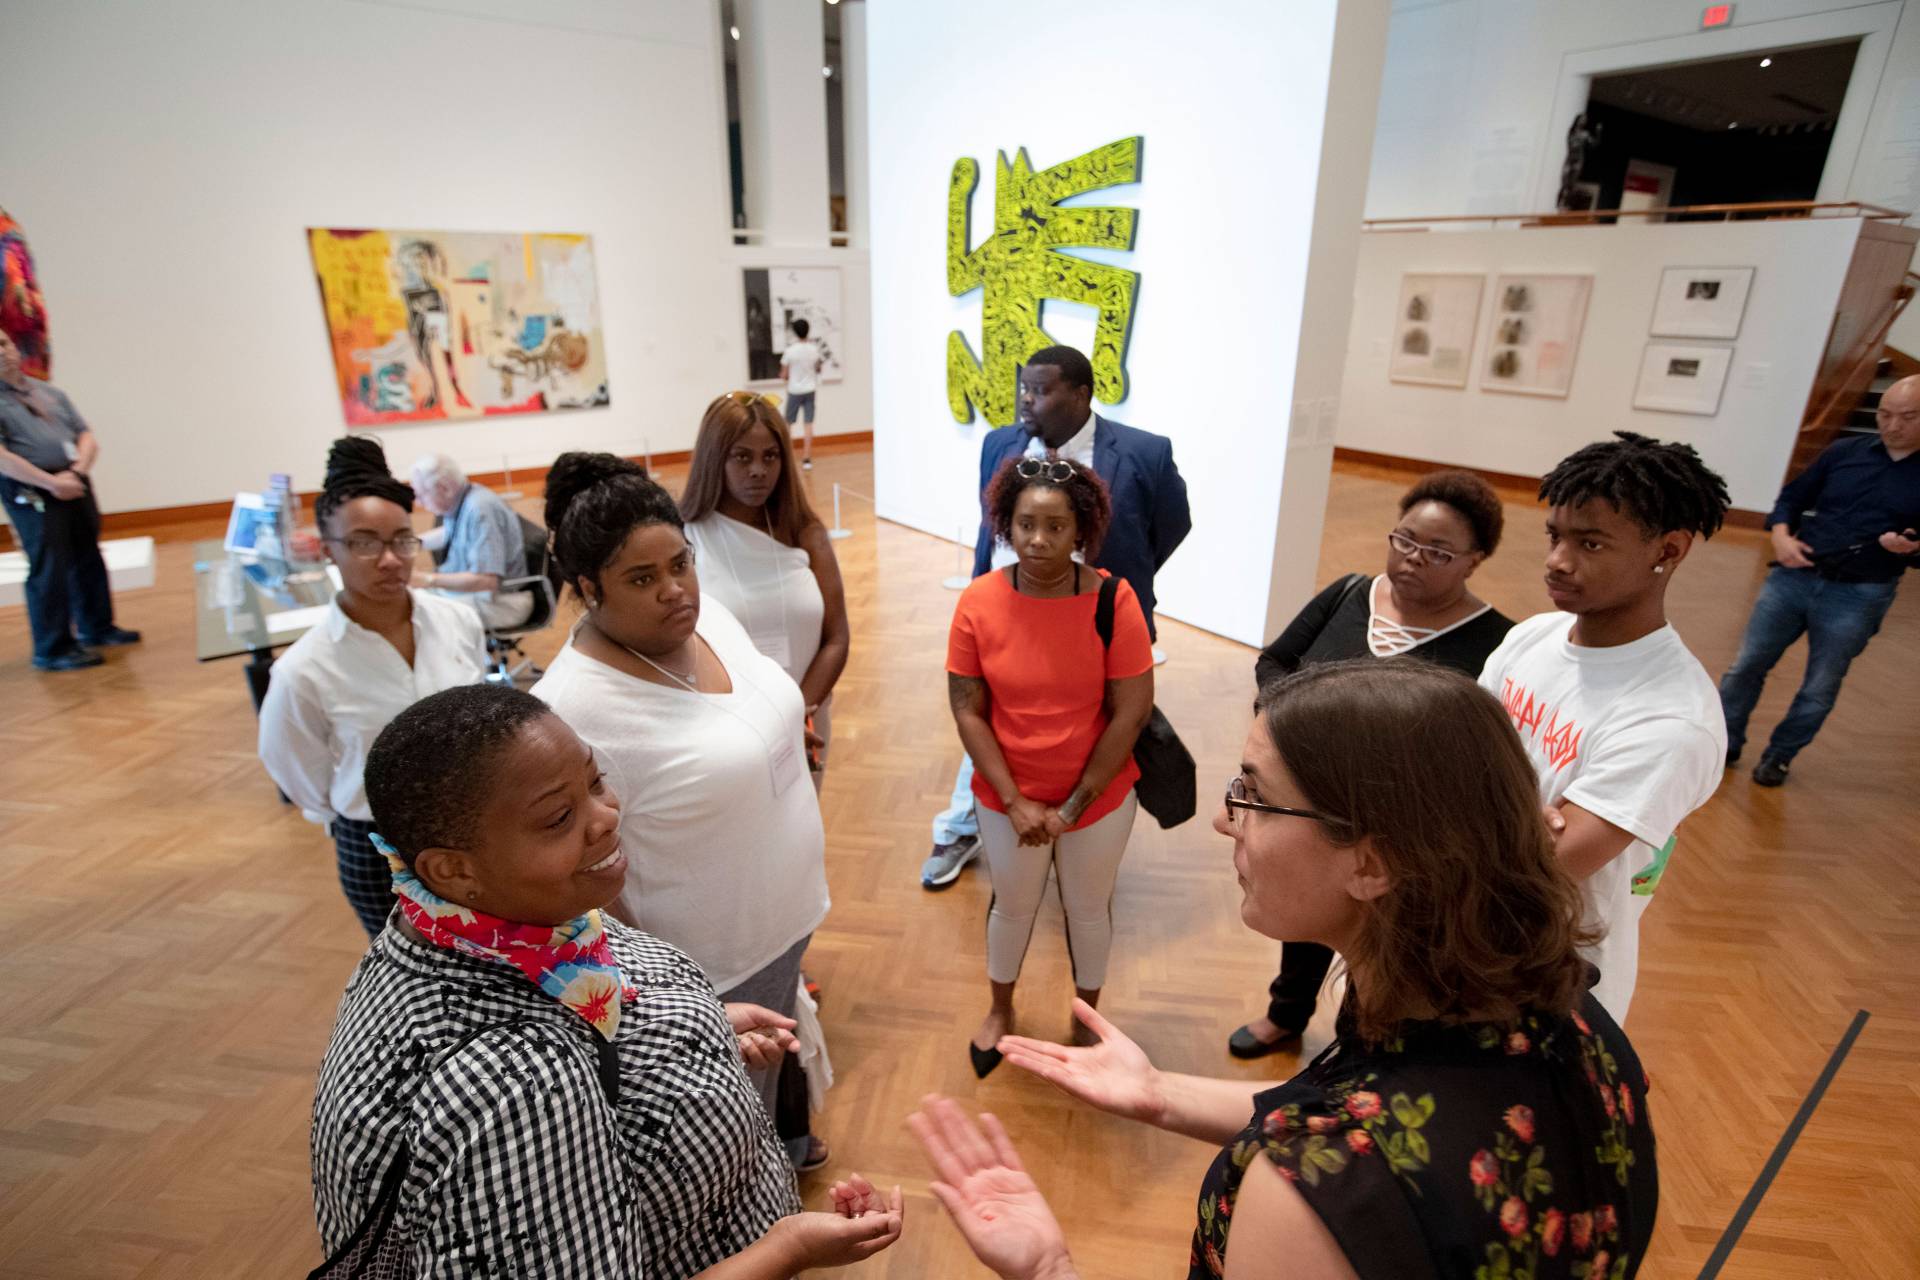 Students and faculty from HBCUs participated in the inaugural Curation, Leadership, Artistry, and Practice Program designed to help increase diversity in the art leadership field. This story captures their reflections on the experience. Pictured: Curator Mitra Abbaspour (foreground right) and I discussed the challenging yet rewarding responsibility of shaping art experiences that build community. Exhibitions cannot tell all of our stories at one time. Abbaspour’s exhibition “The Figure Abstracted” examines 